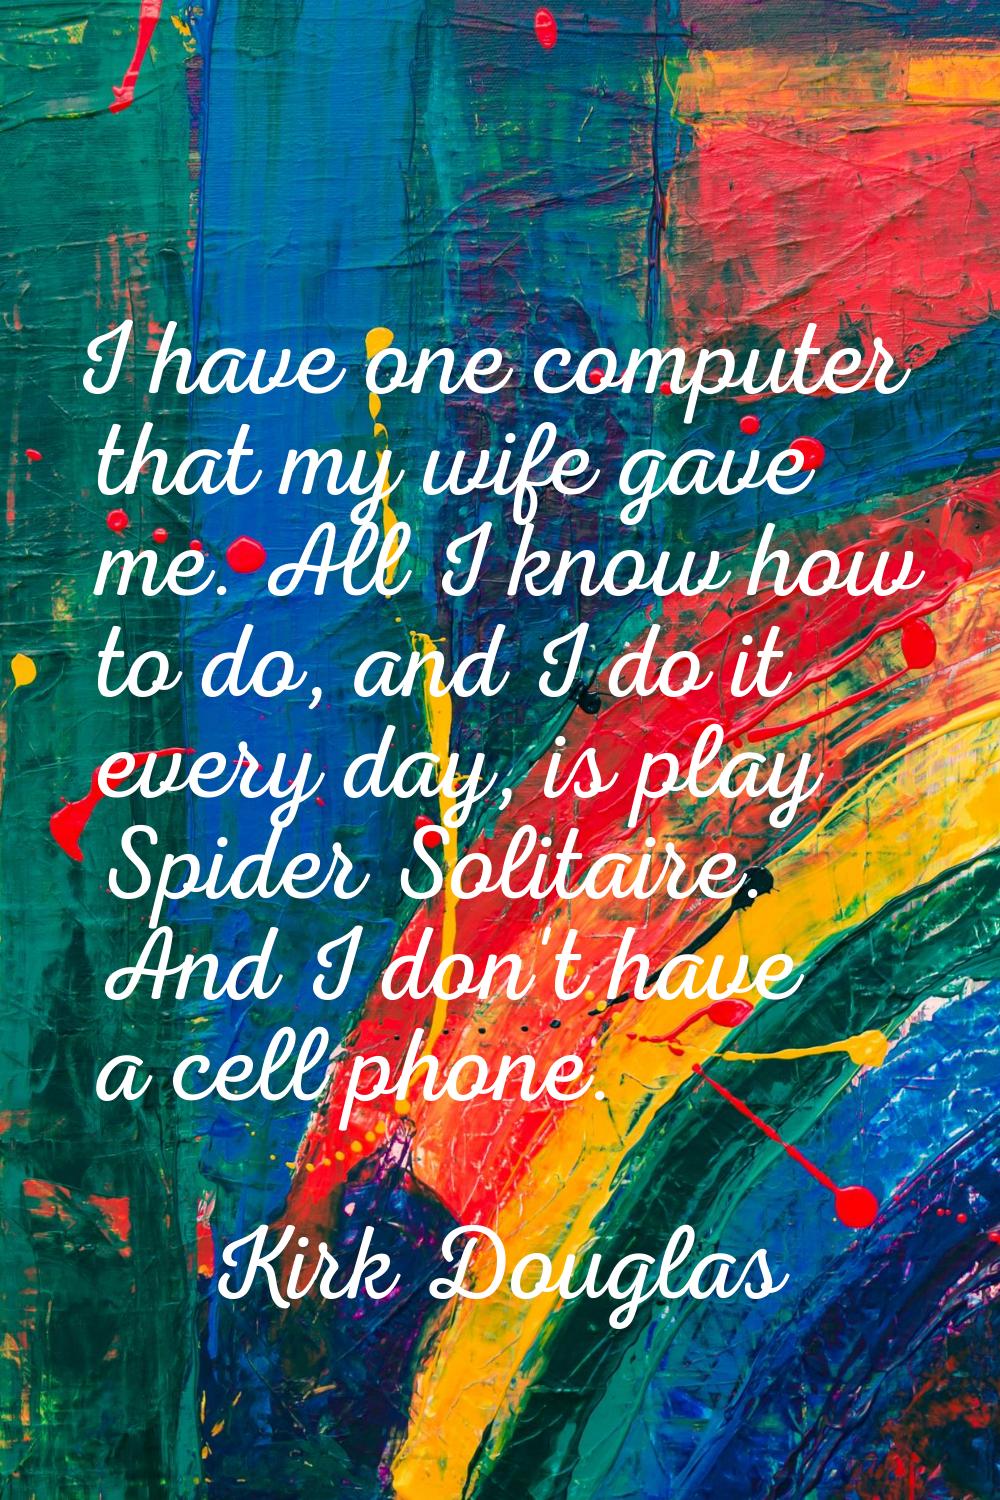 I have one computer that my wife gave me. All I know how to do, and I do it every day, is play Spid